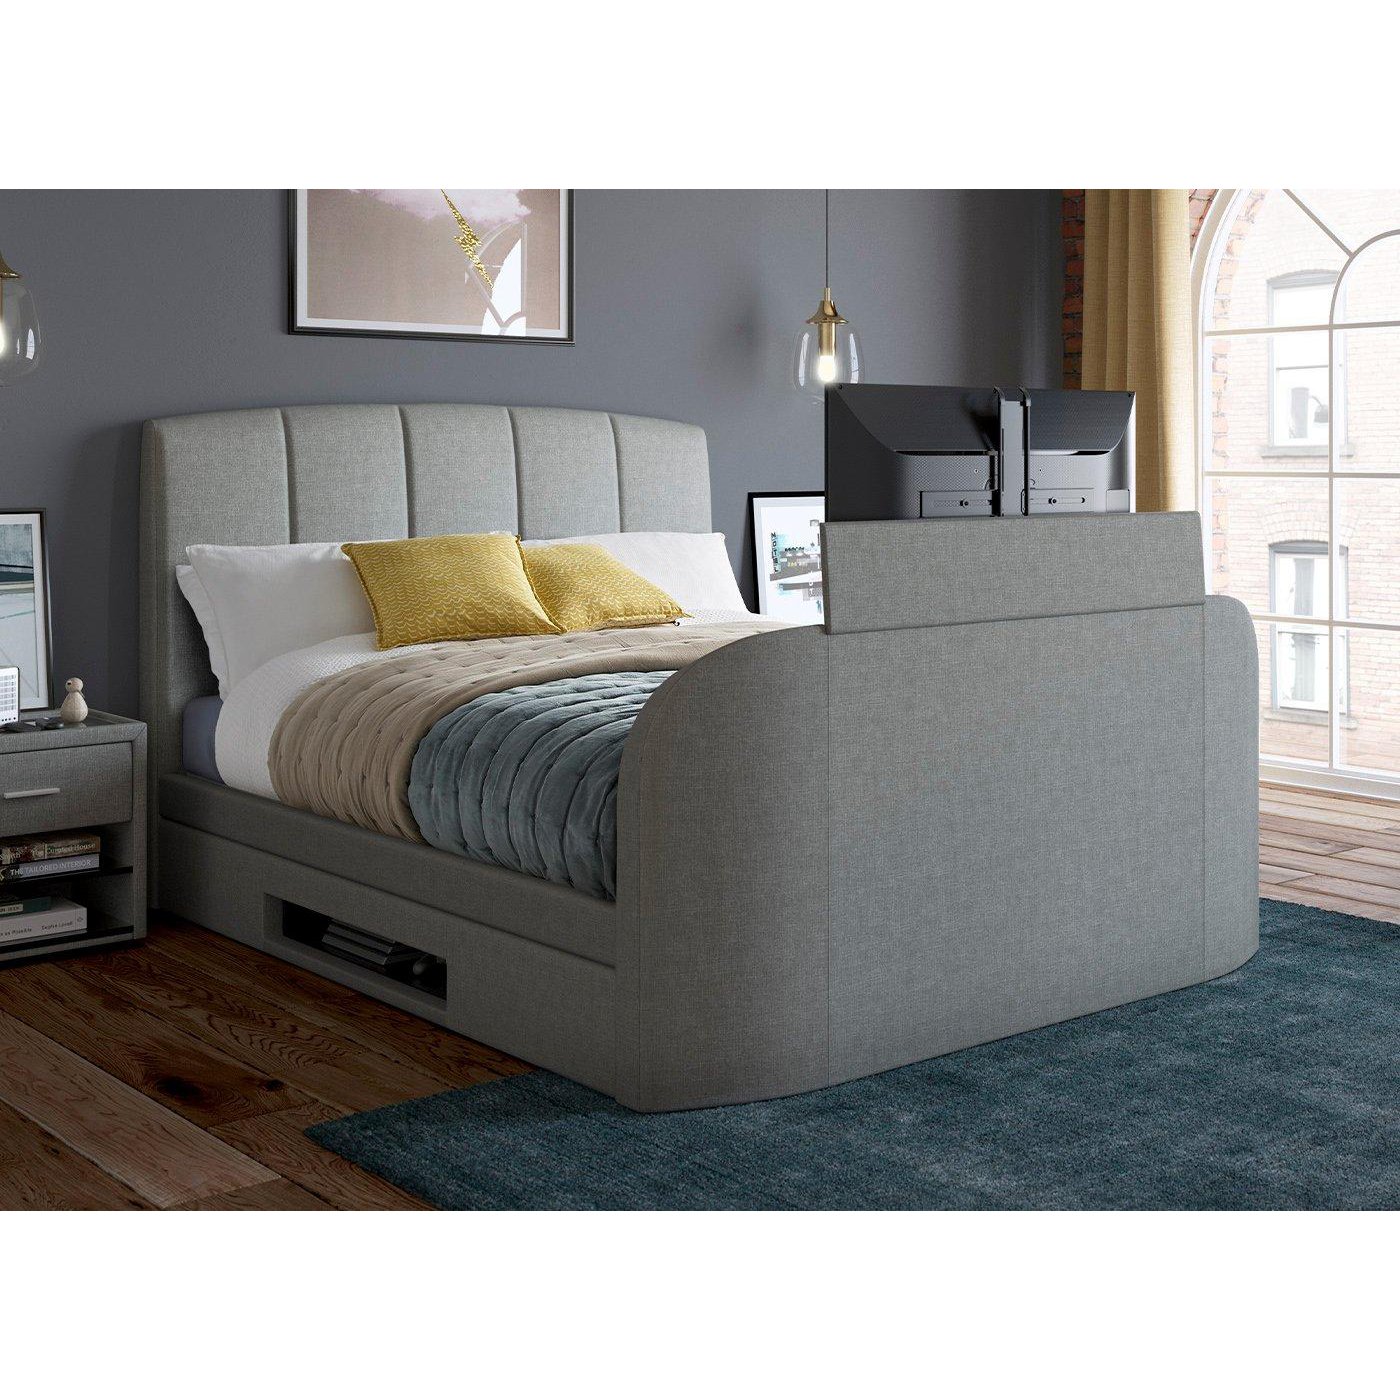 Seoul Upholstered Ottoman TV Bed Frame - 4'6 Double - Grey